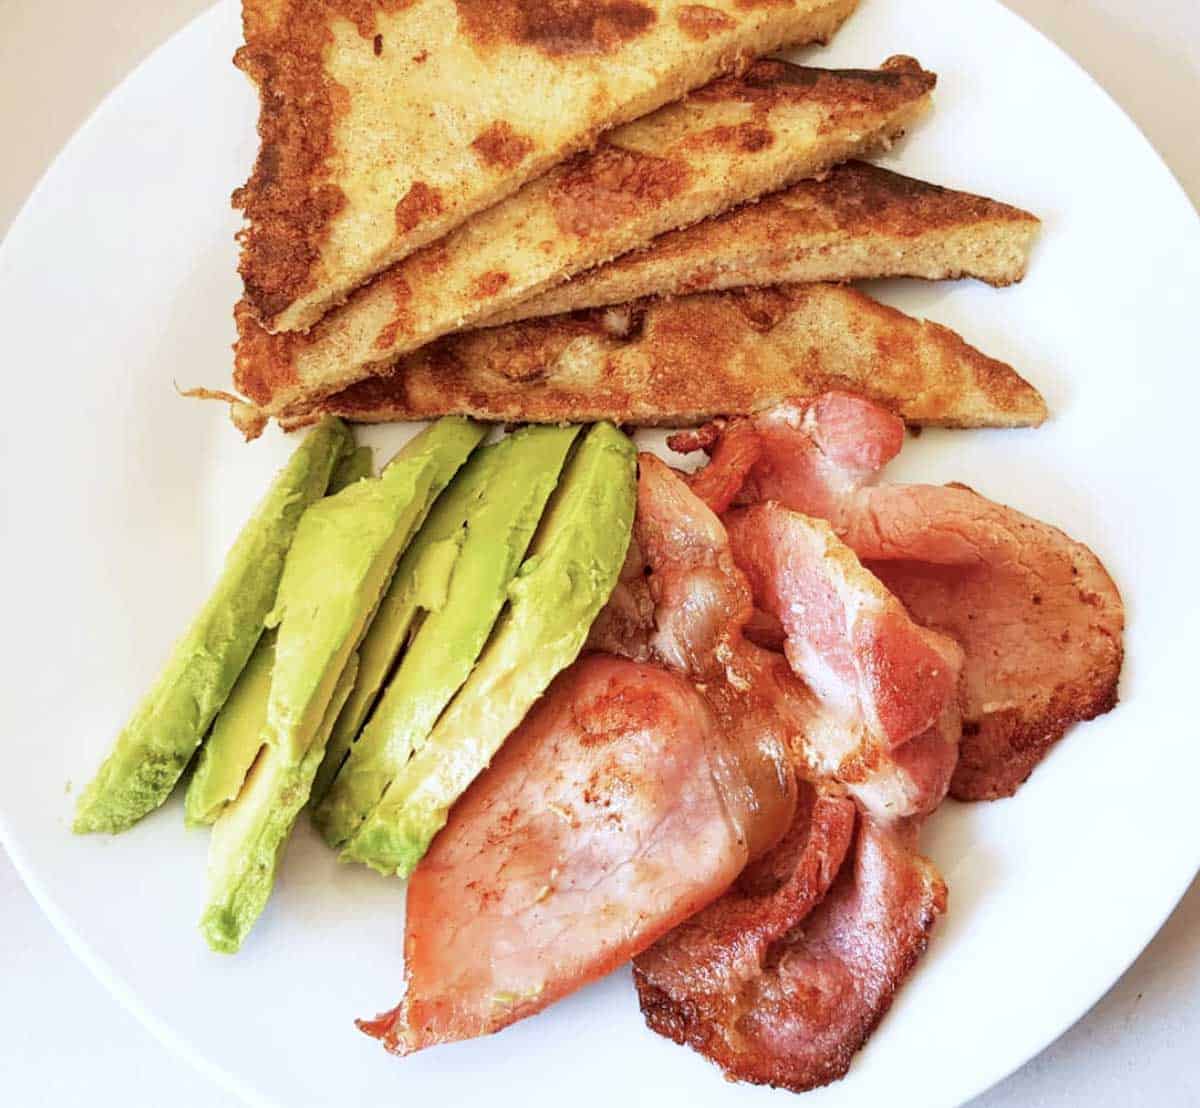 Keto French toast served with bacon and avocado.